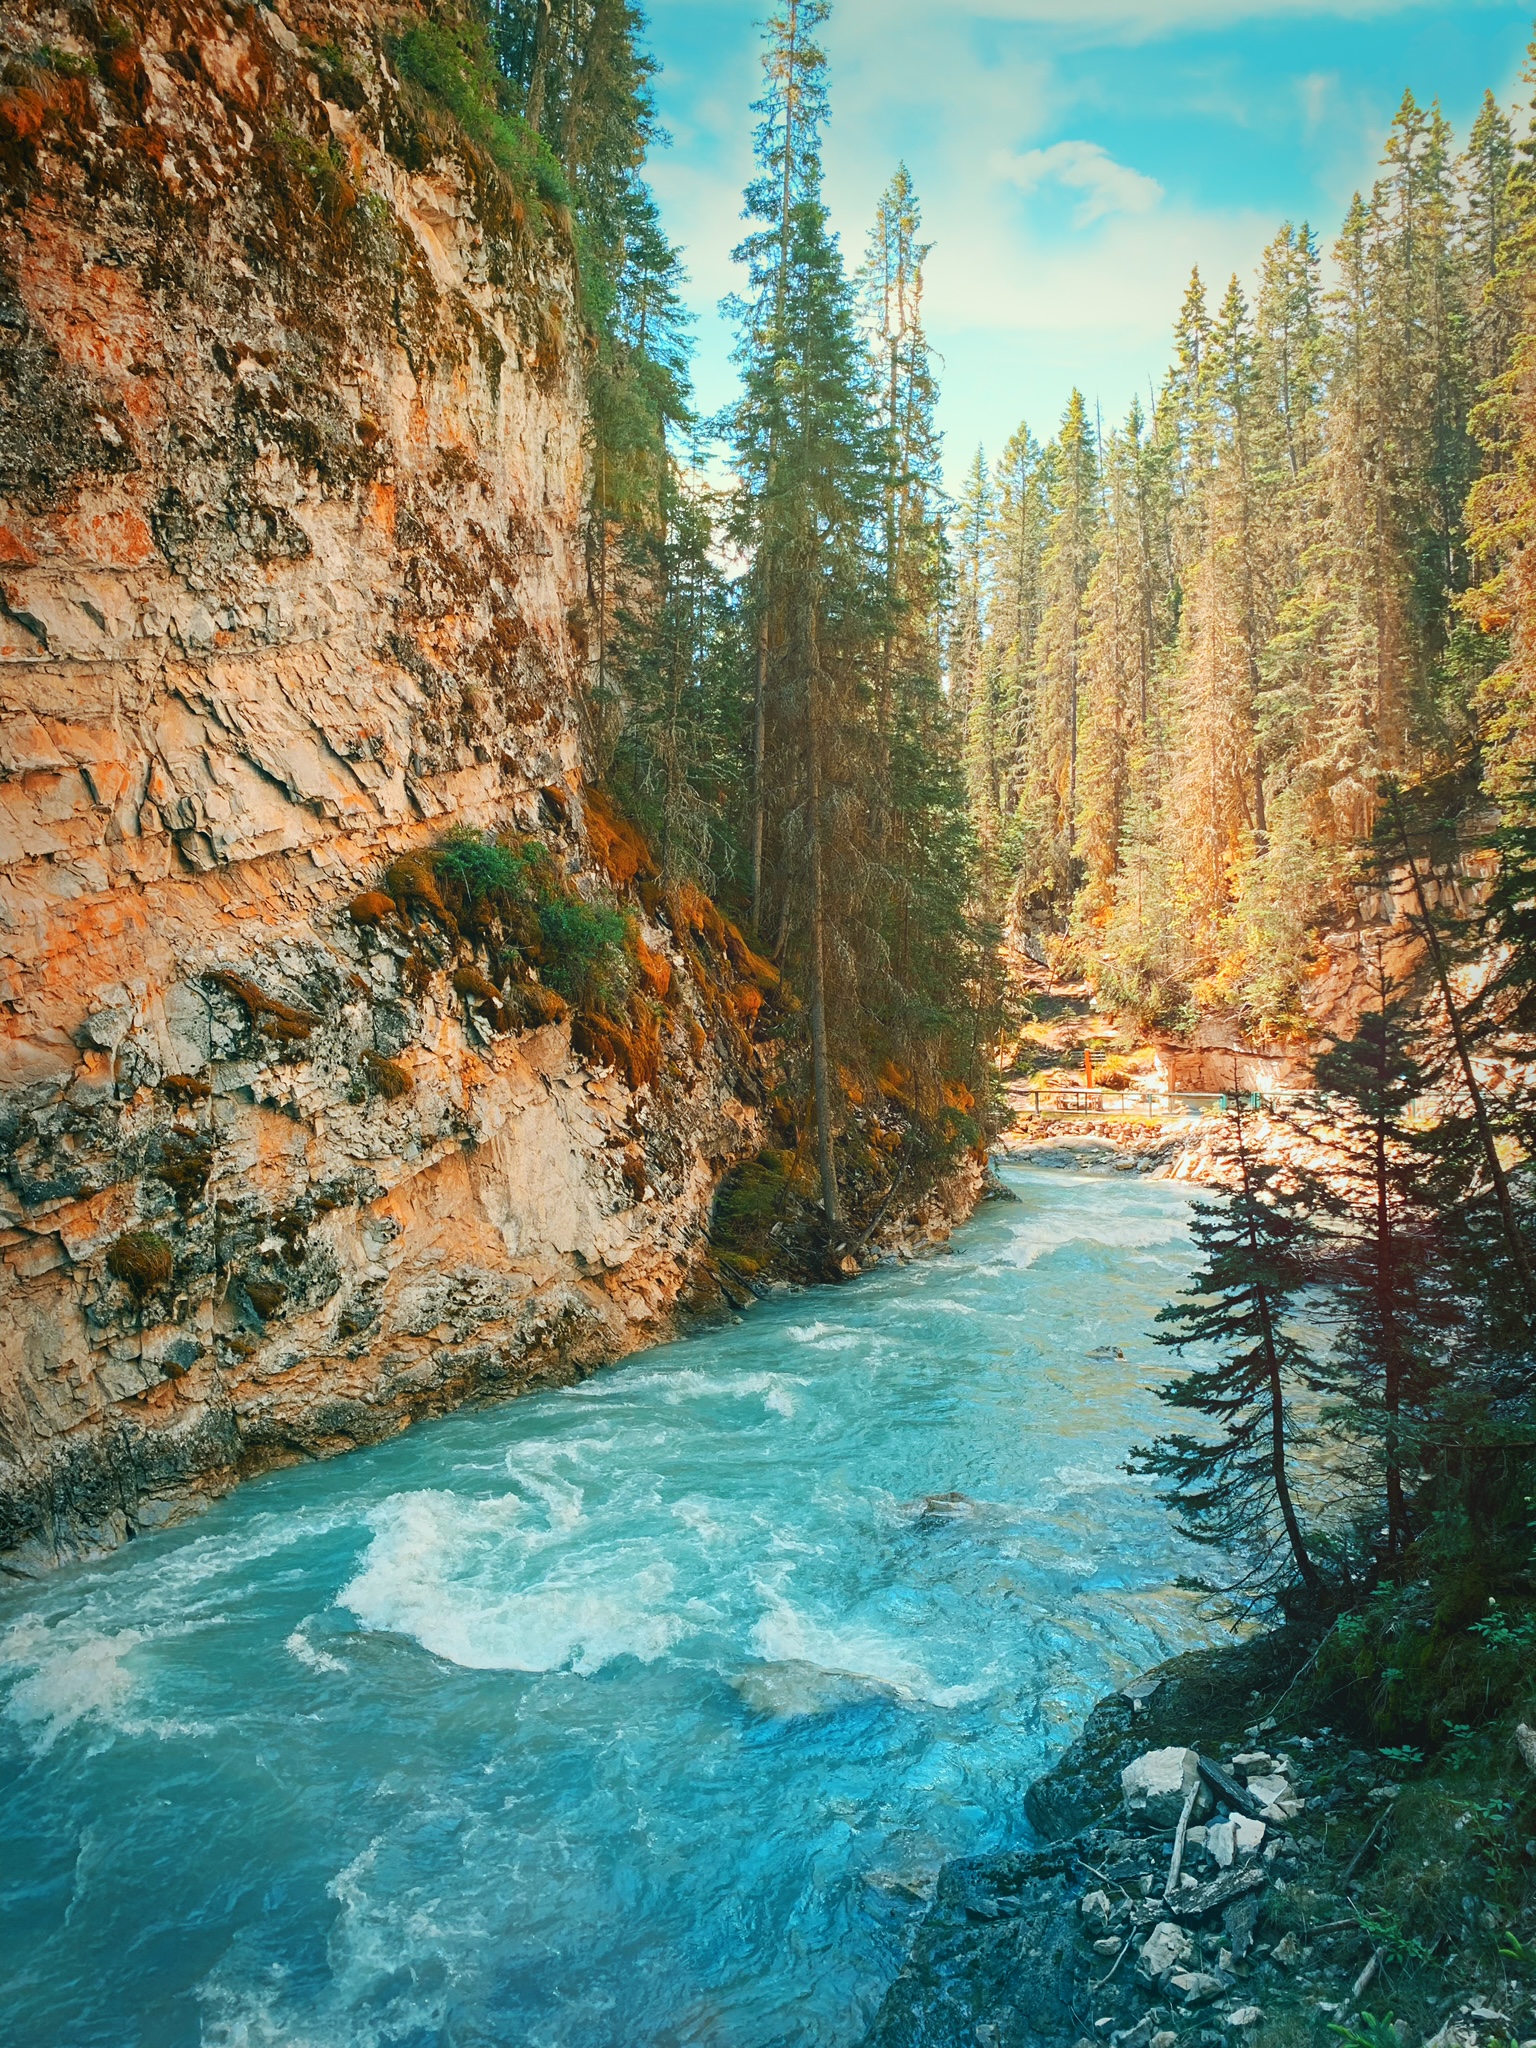 Johnston Canyon Hike - Things to do in Banff Canada